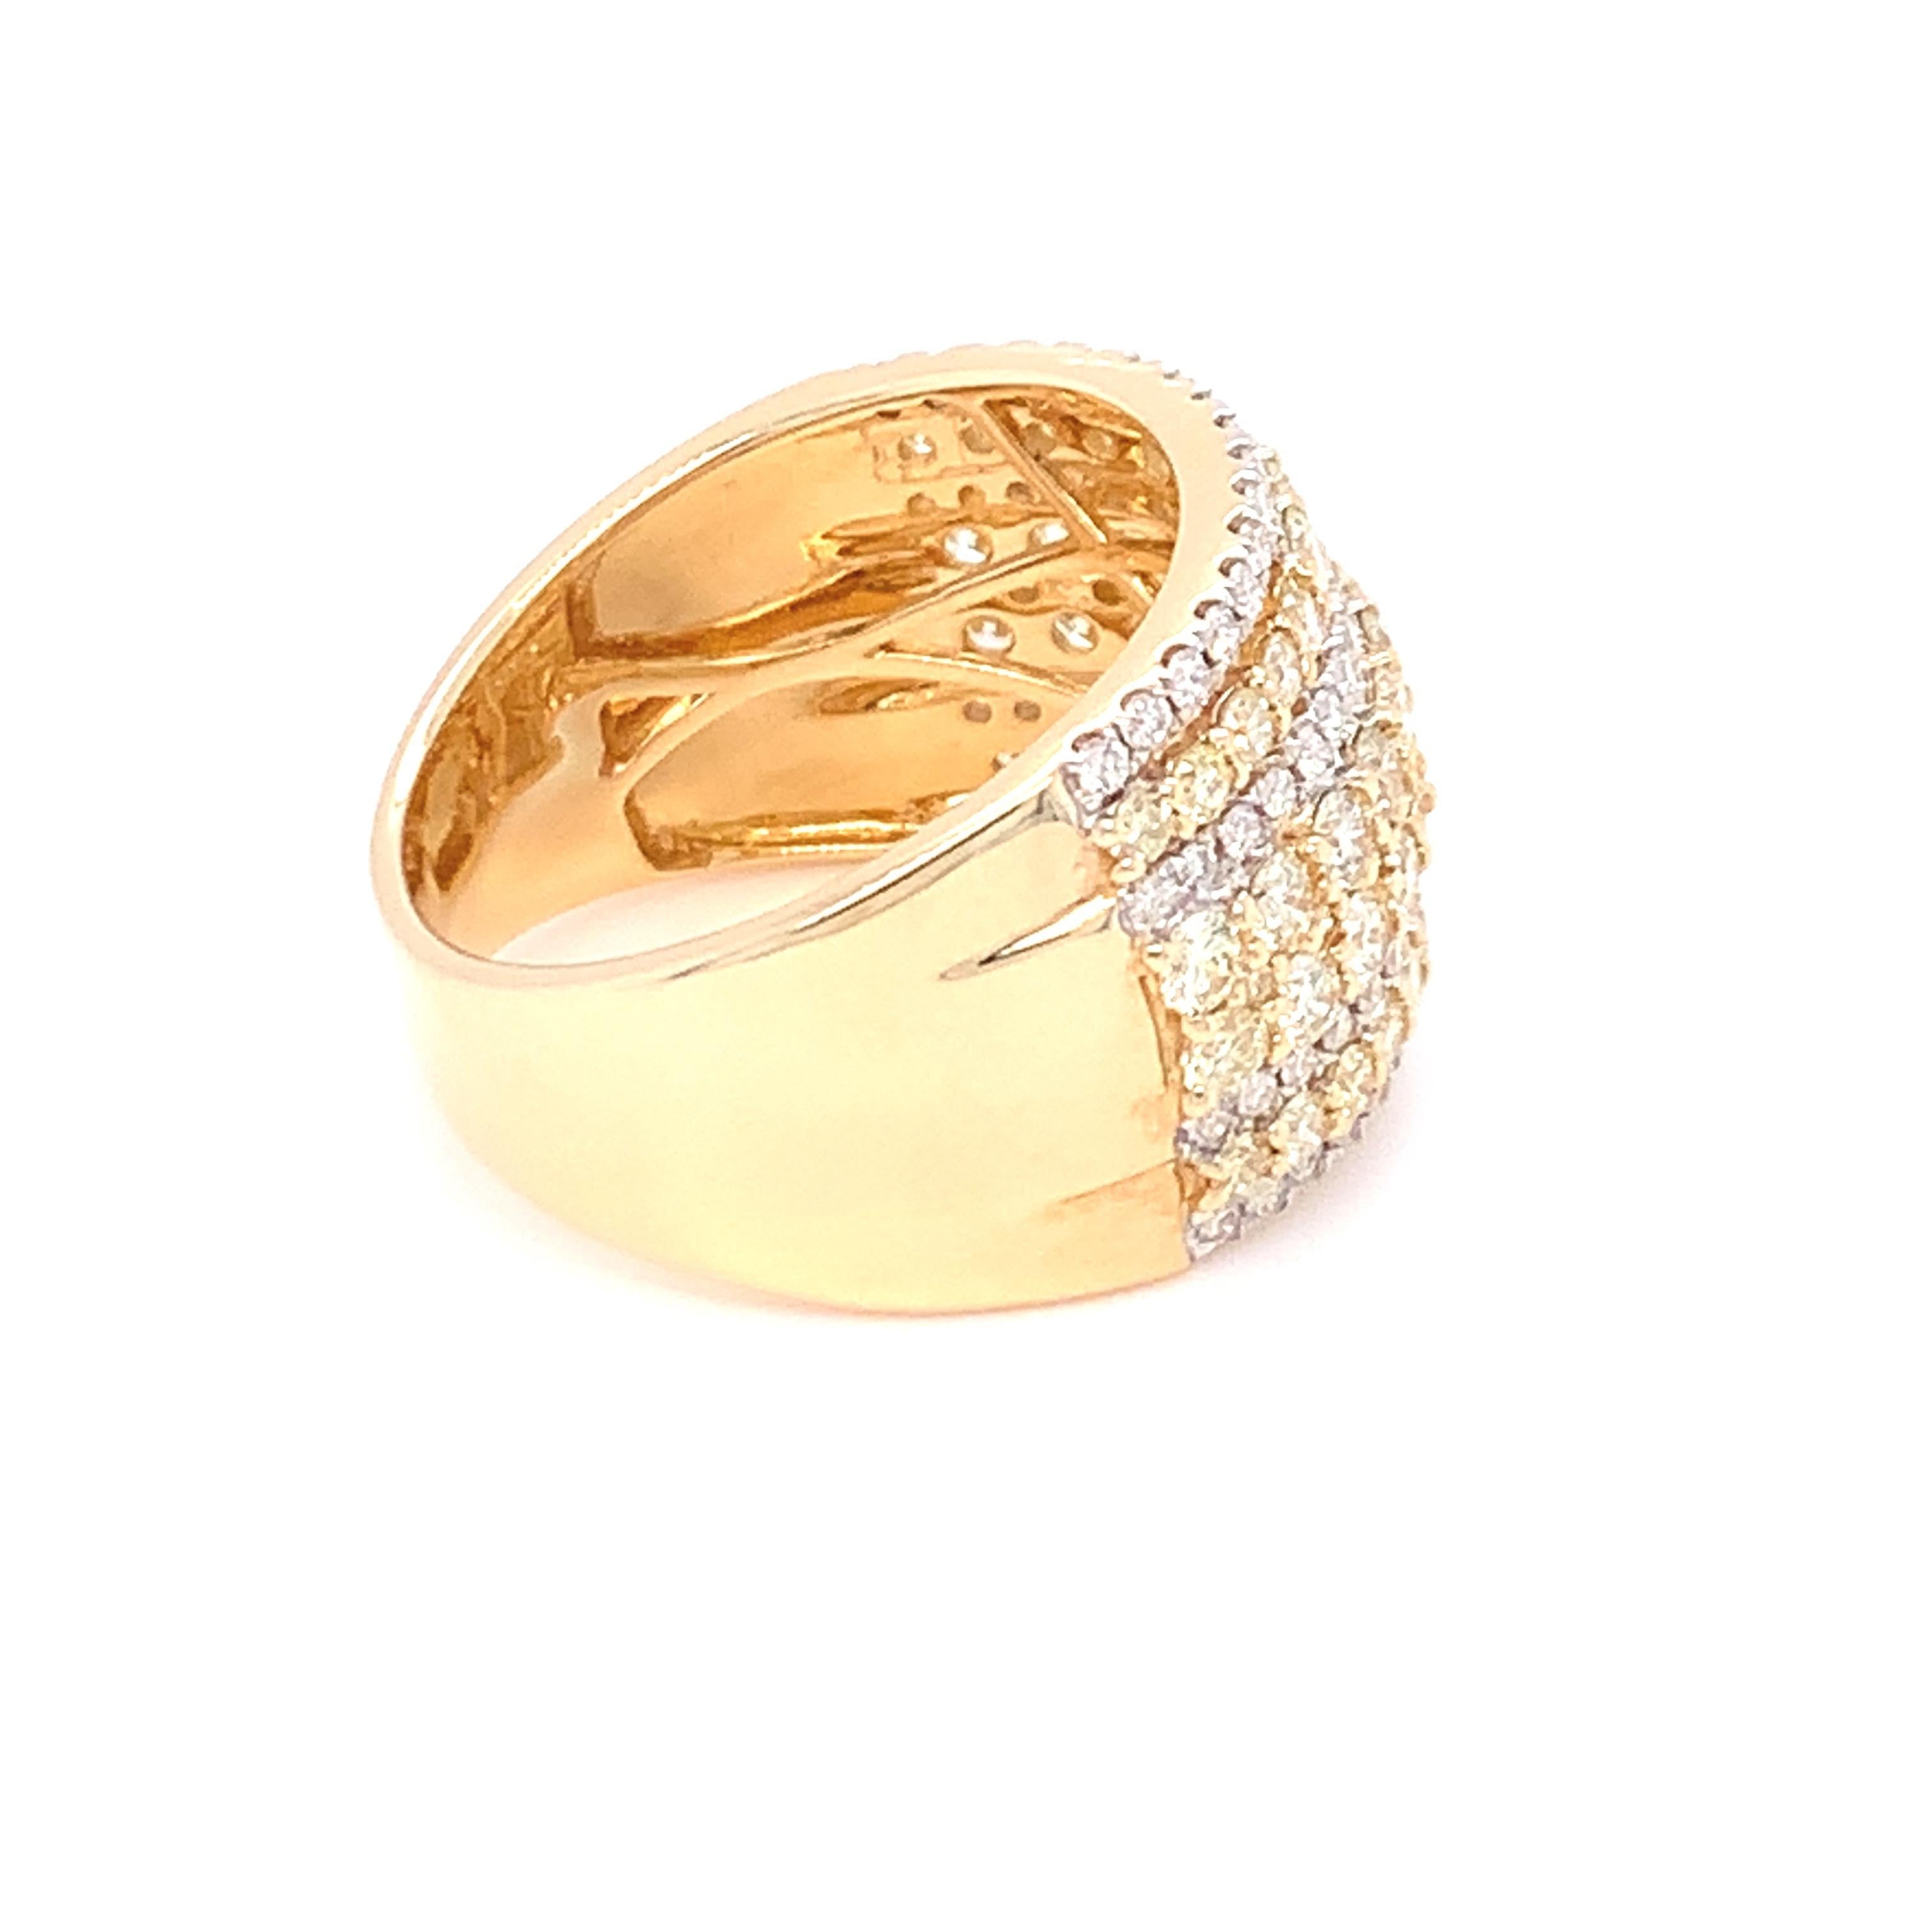 2.08 Carat Diamond Band Ring in 14k Yellow Gold In New Condition For Sale In Trumbull, CT